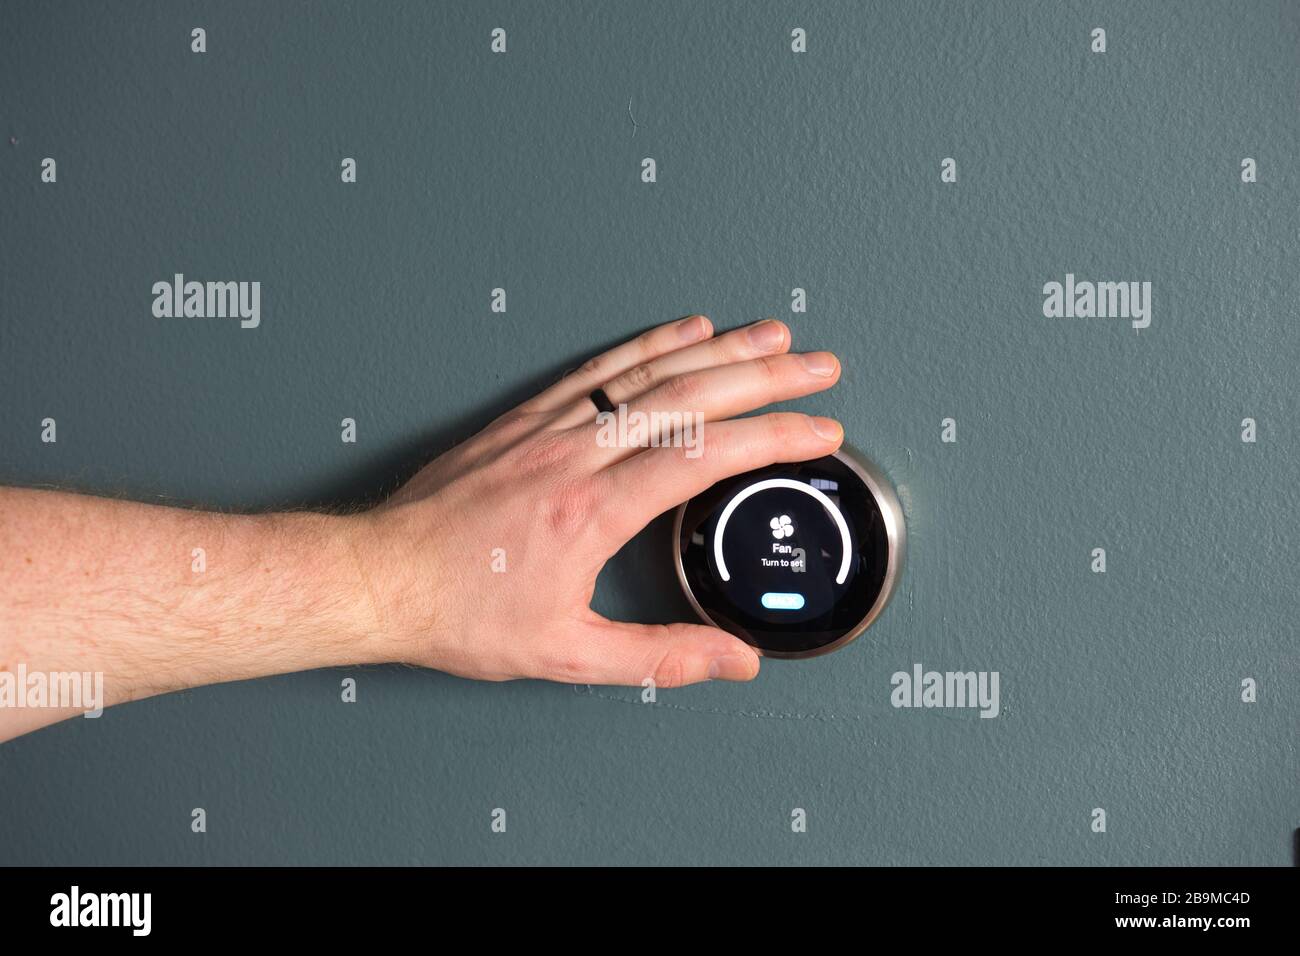 Green tech- Electric thermostat to save money and energy. Hand present to make adjustments Stock Photo